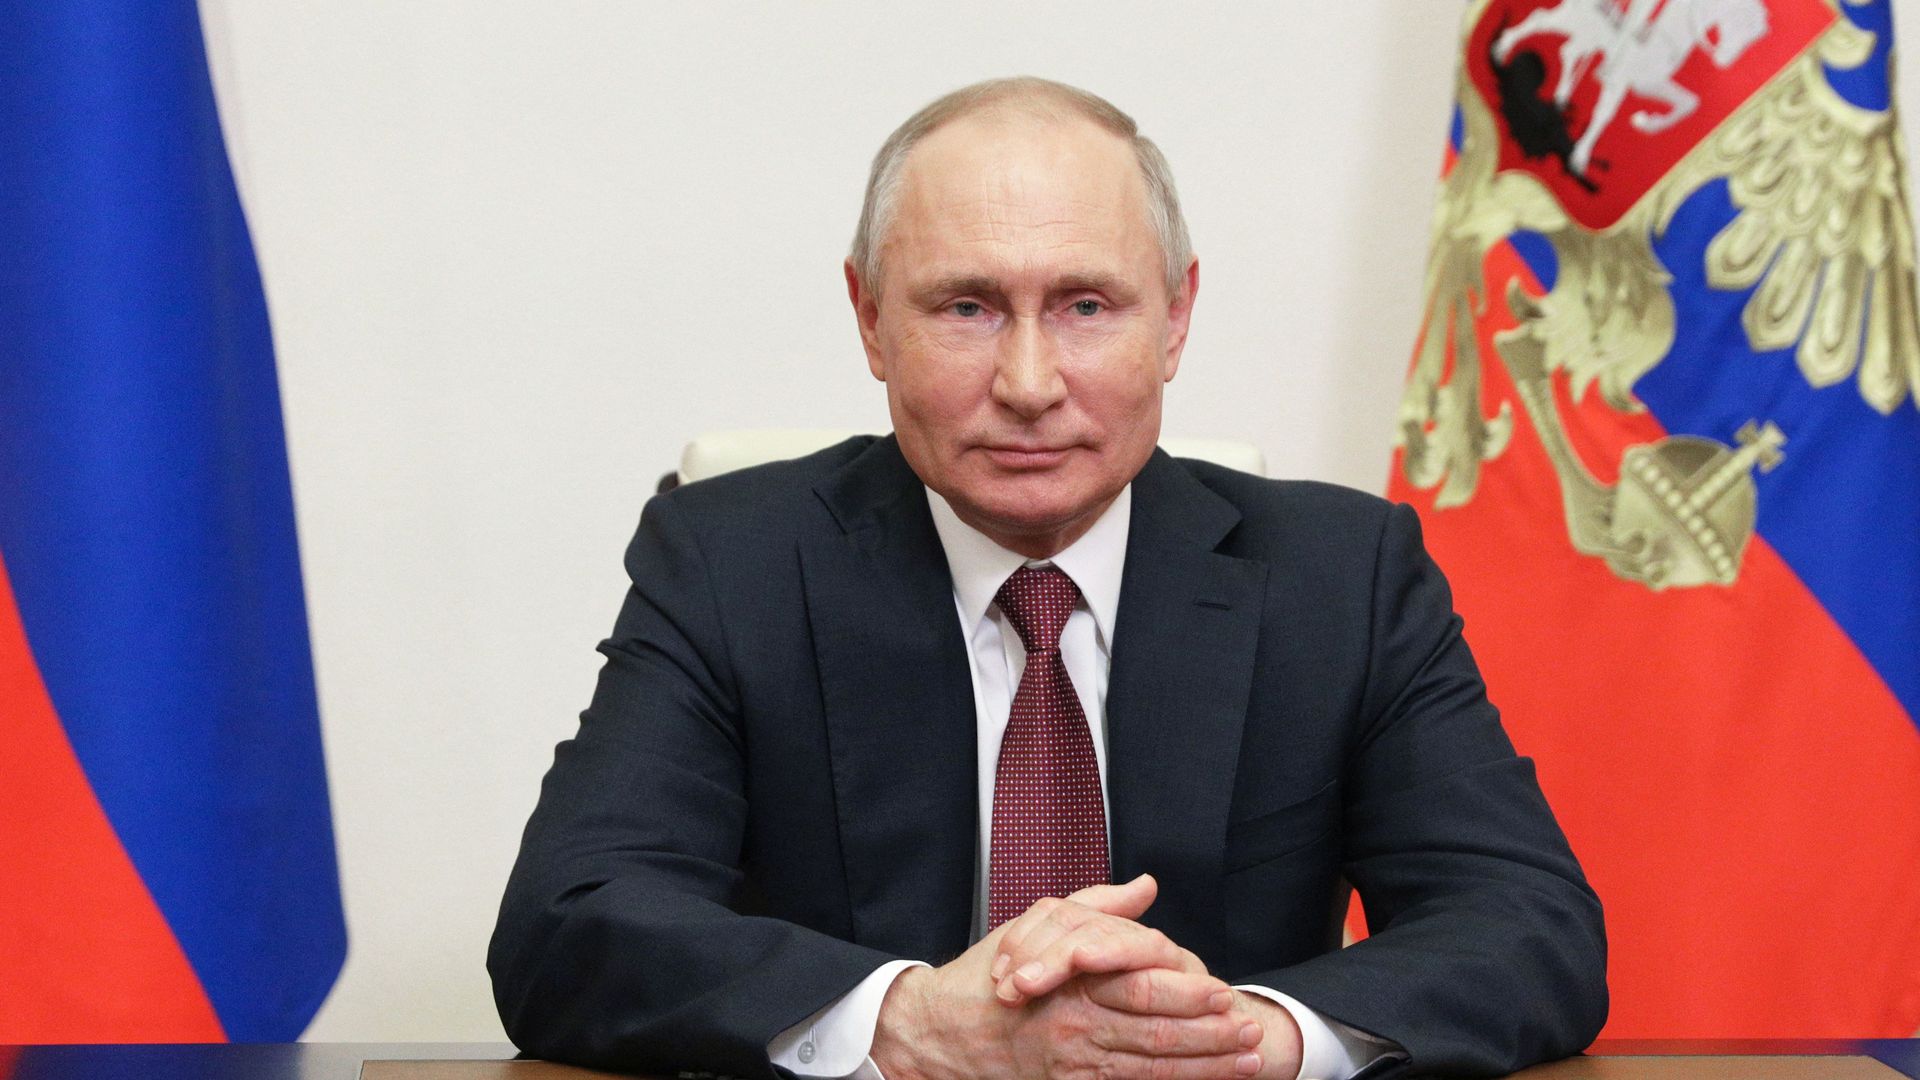 Russian President Vladimir Putin during a video message on May 27.